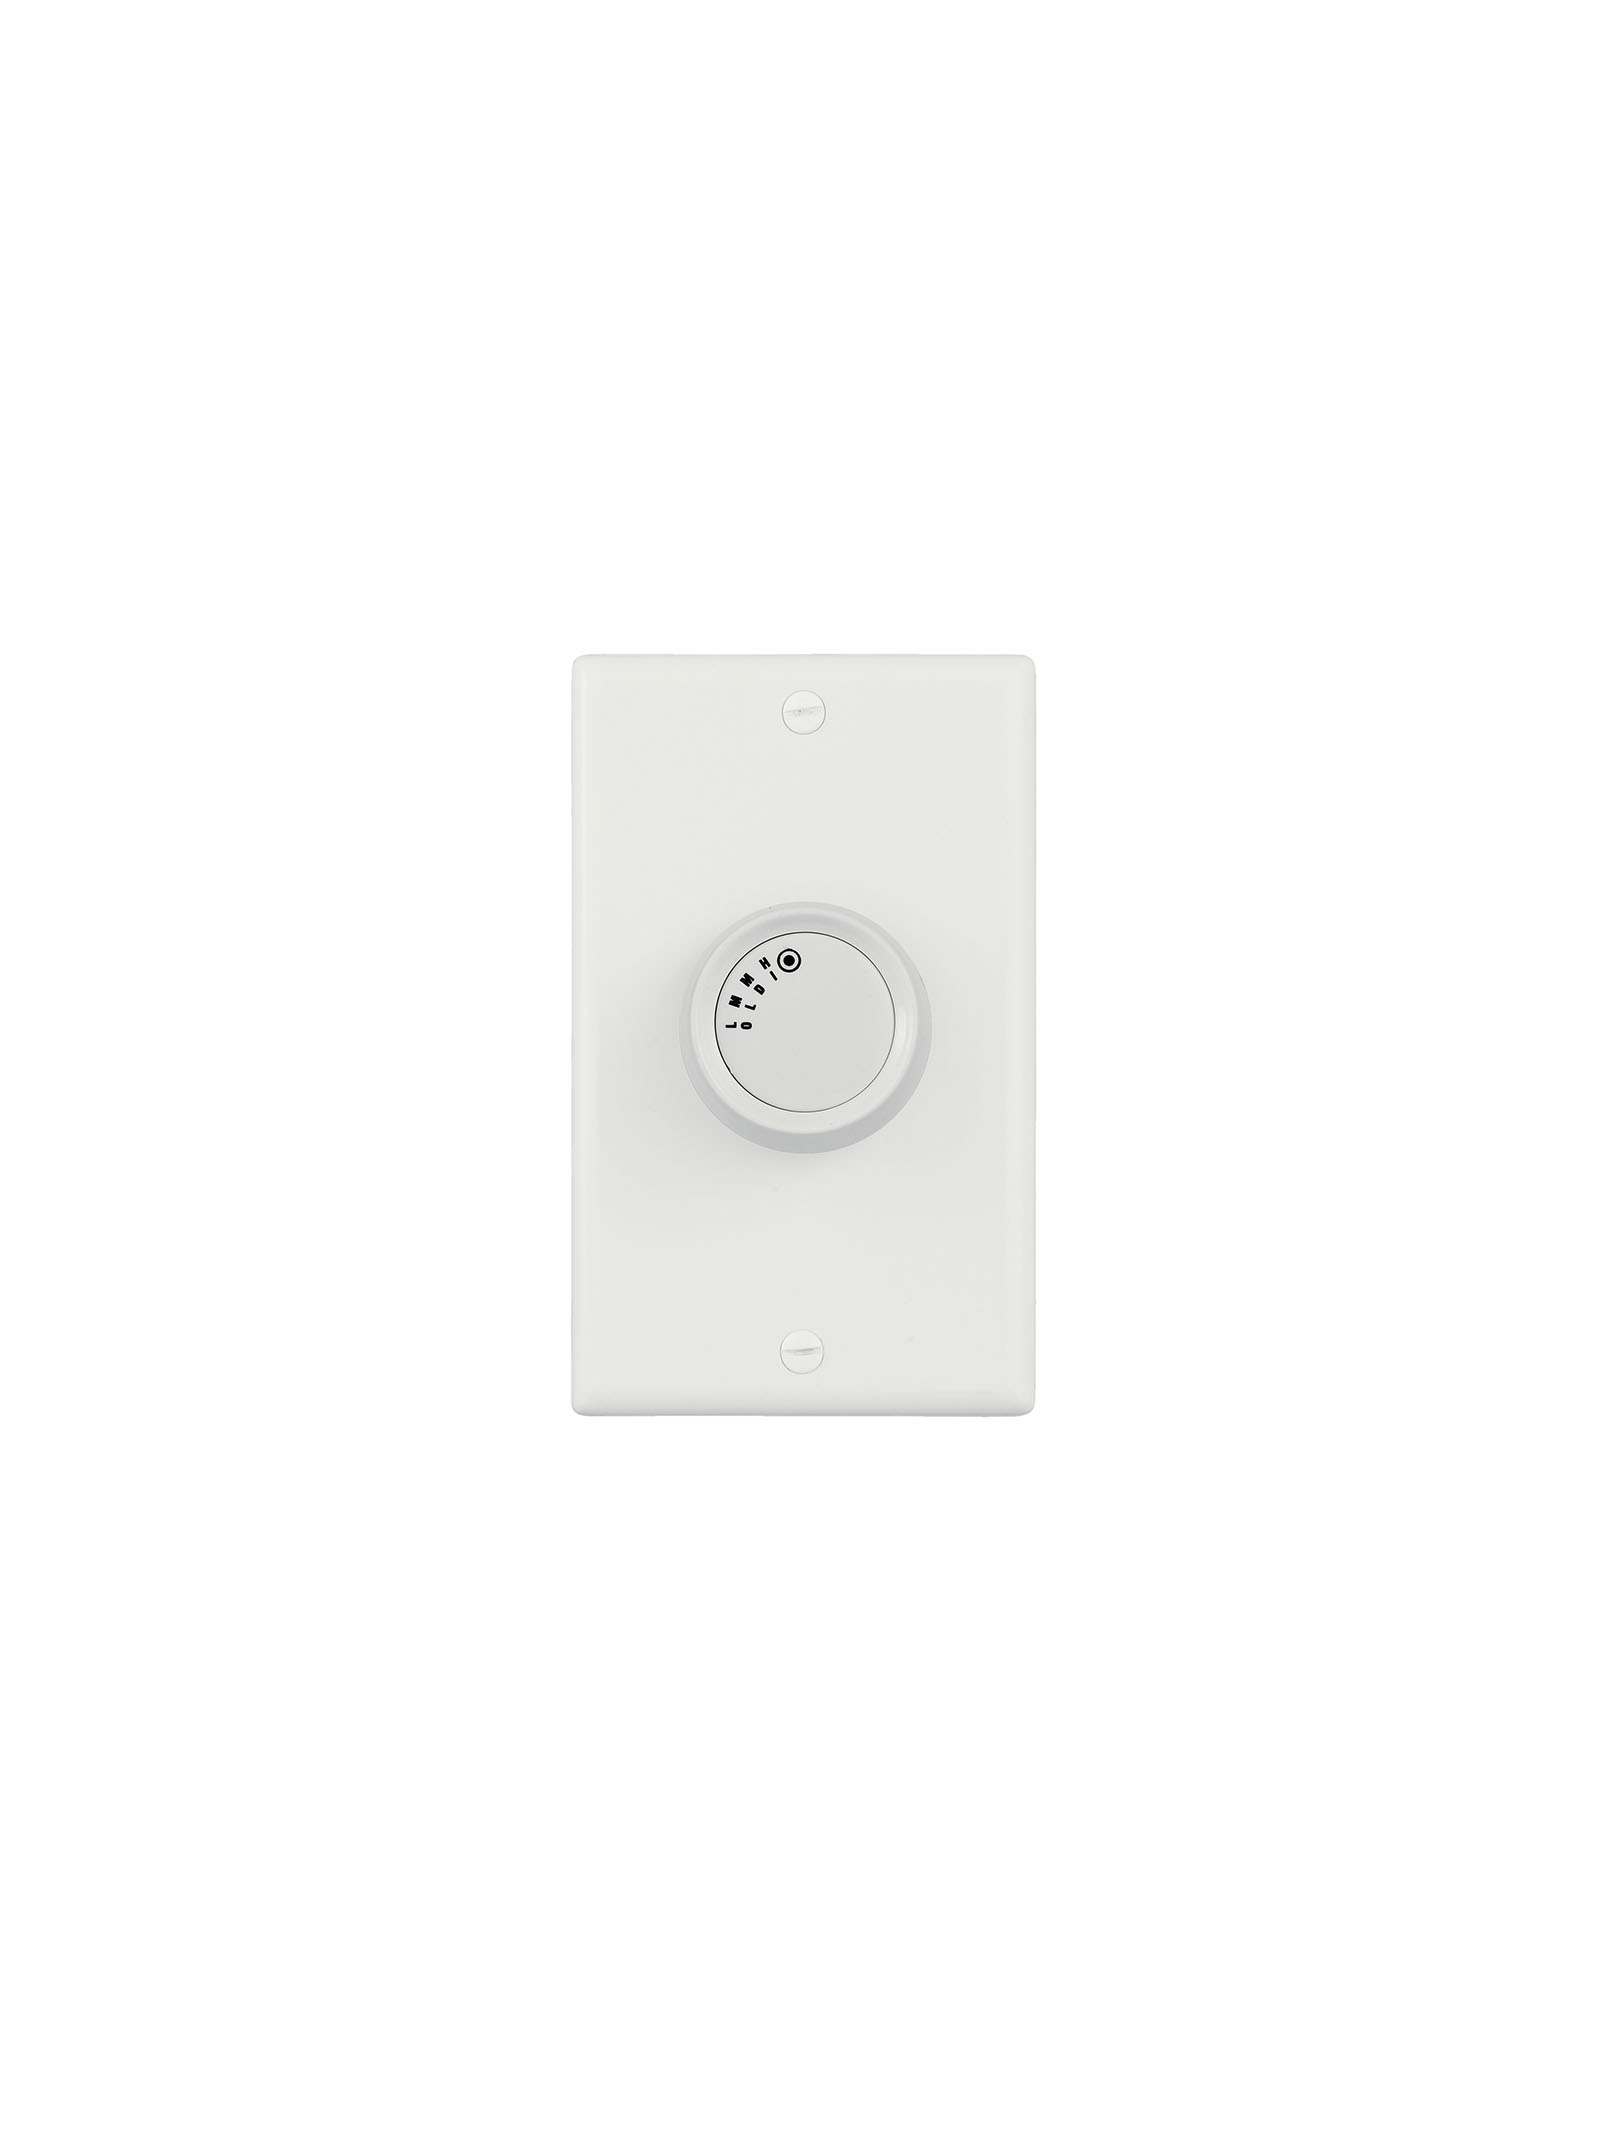 This basic 4 speed rotary wall switch 5 A accessory features multiple versatile finishes.